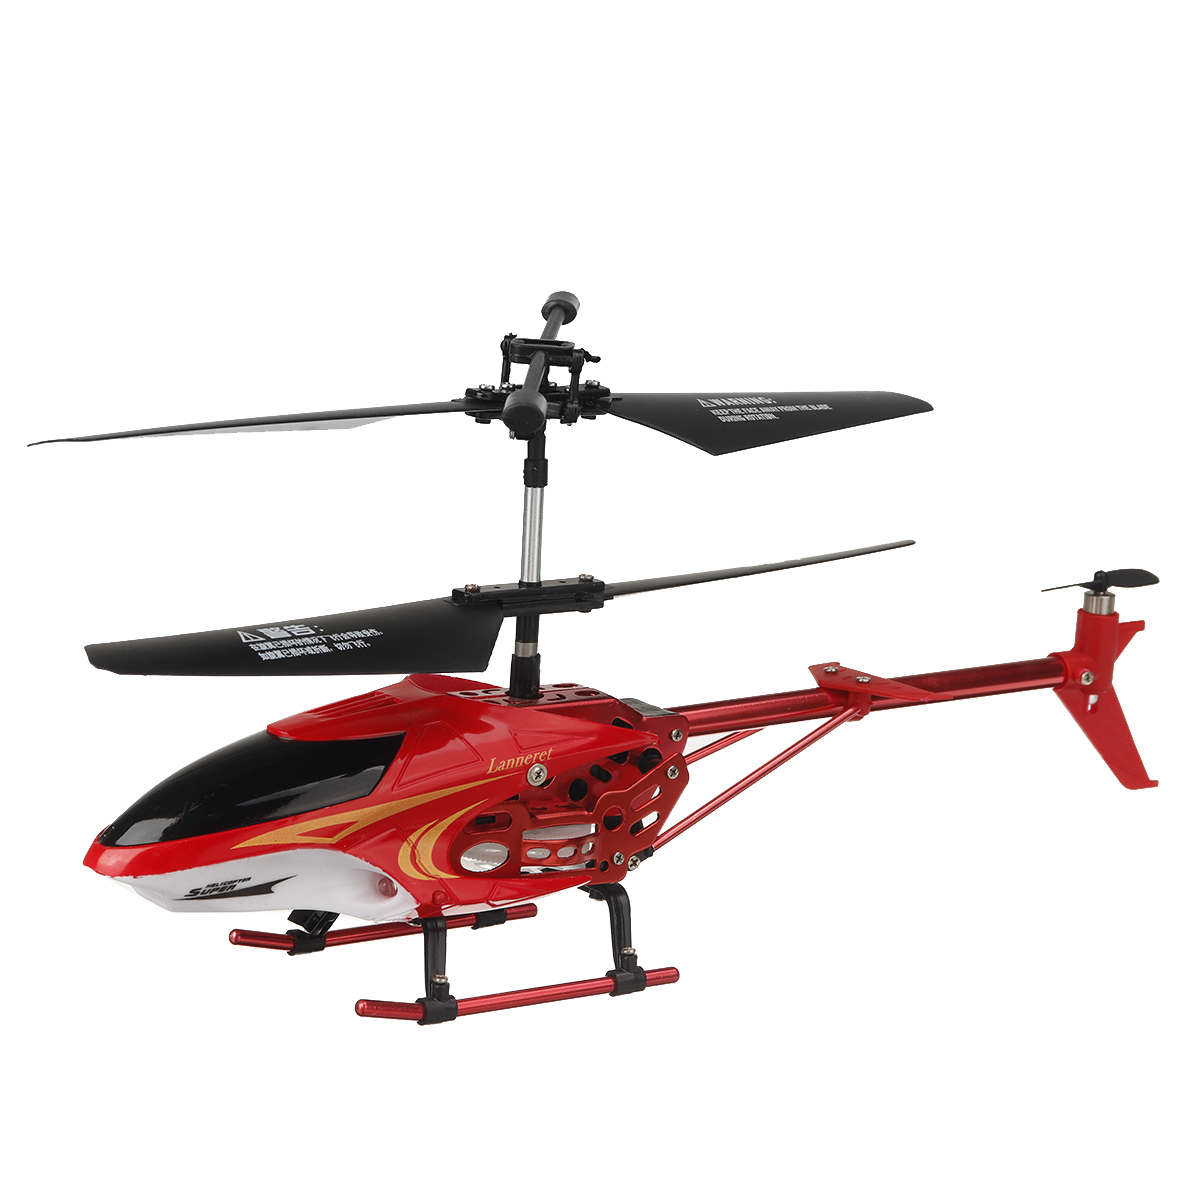 35CH-Alloy-Fall-Resistant-USB-Charging-Lock-tail-Gyroscope-Remote-Control-Helicopter-1846822-5